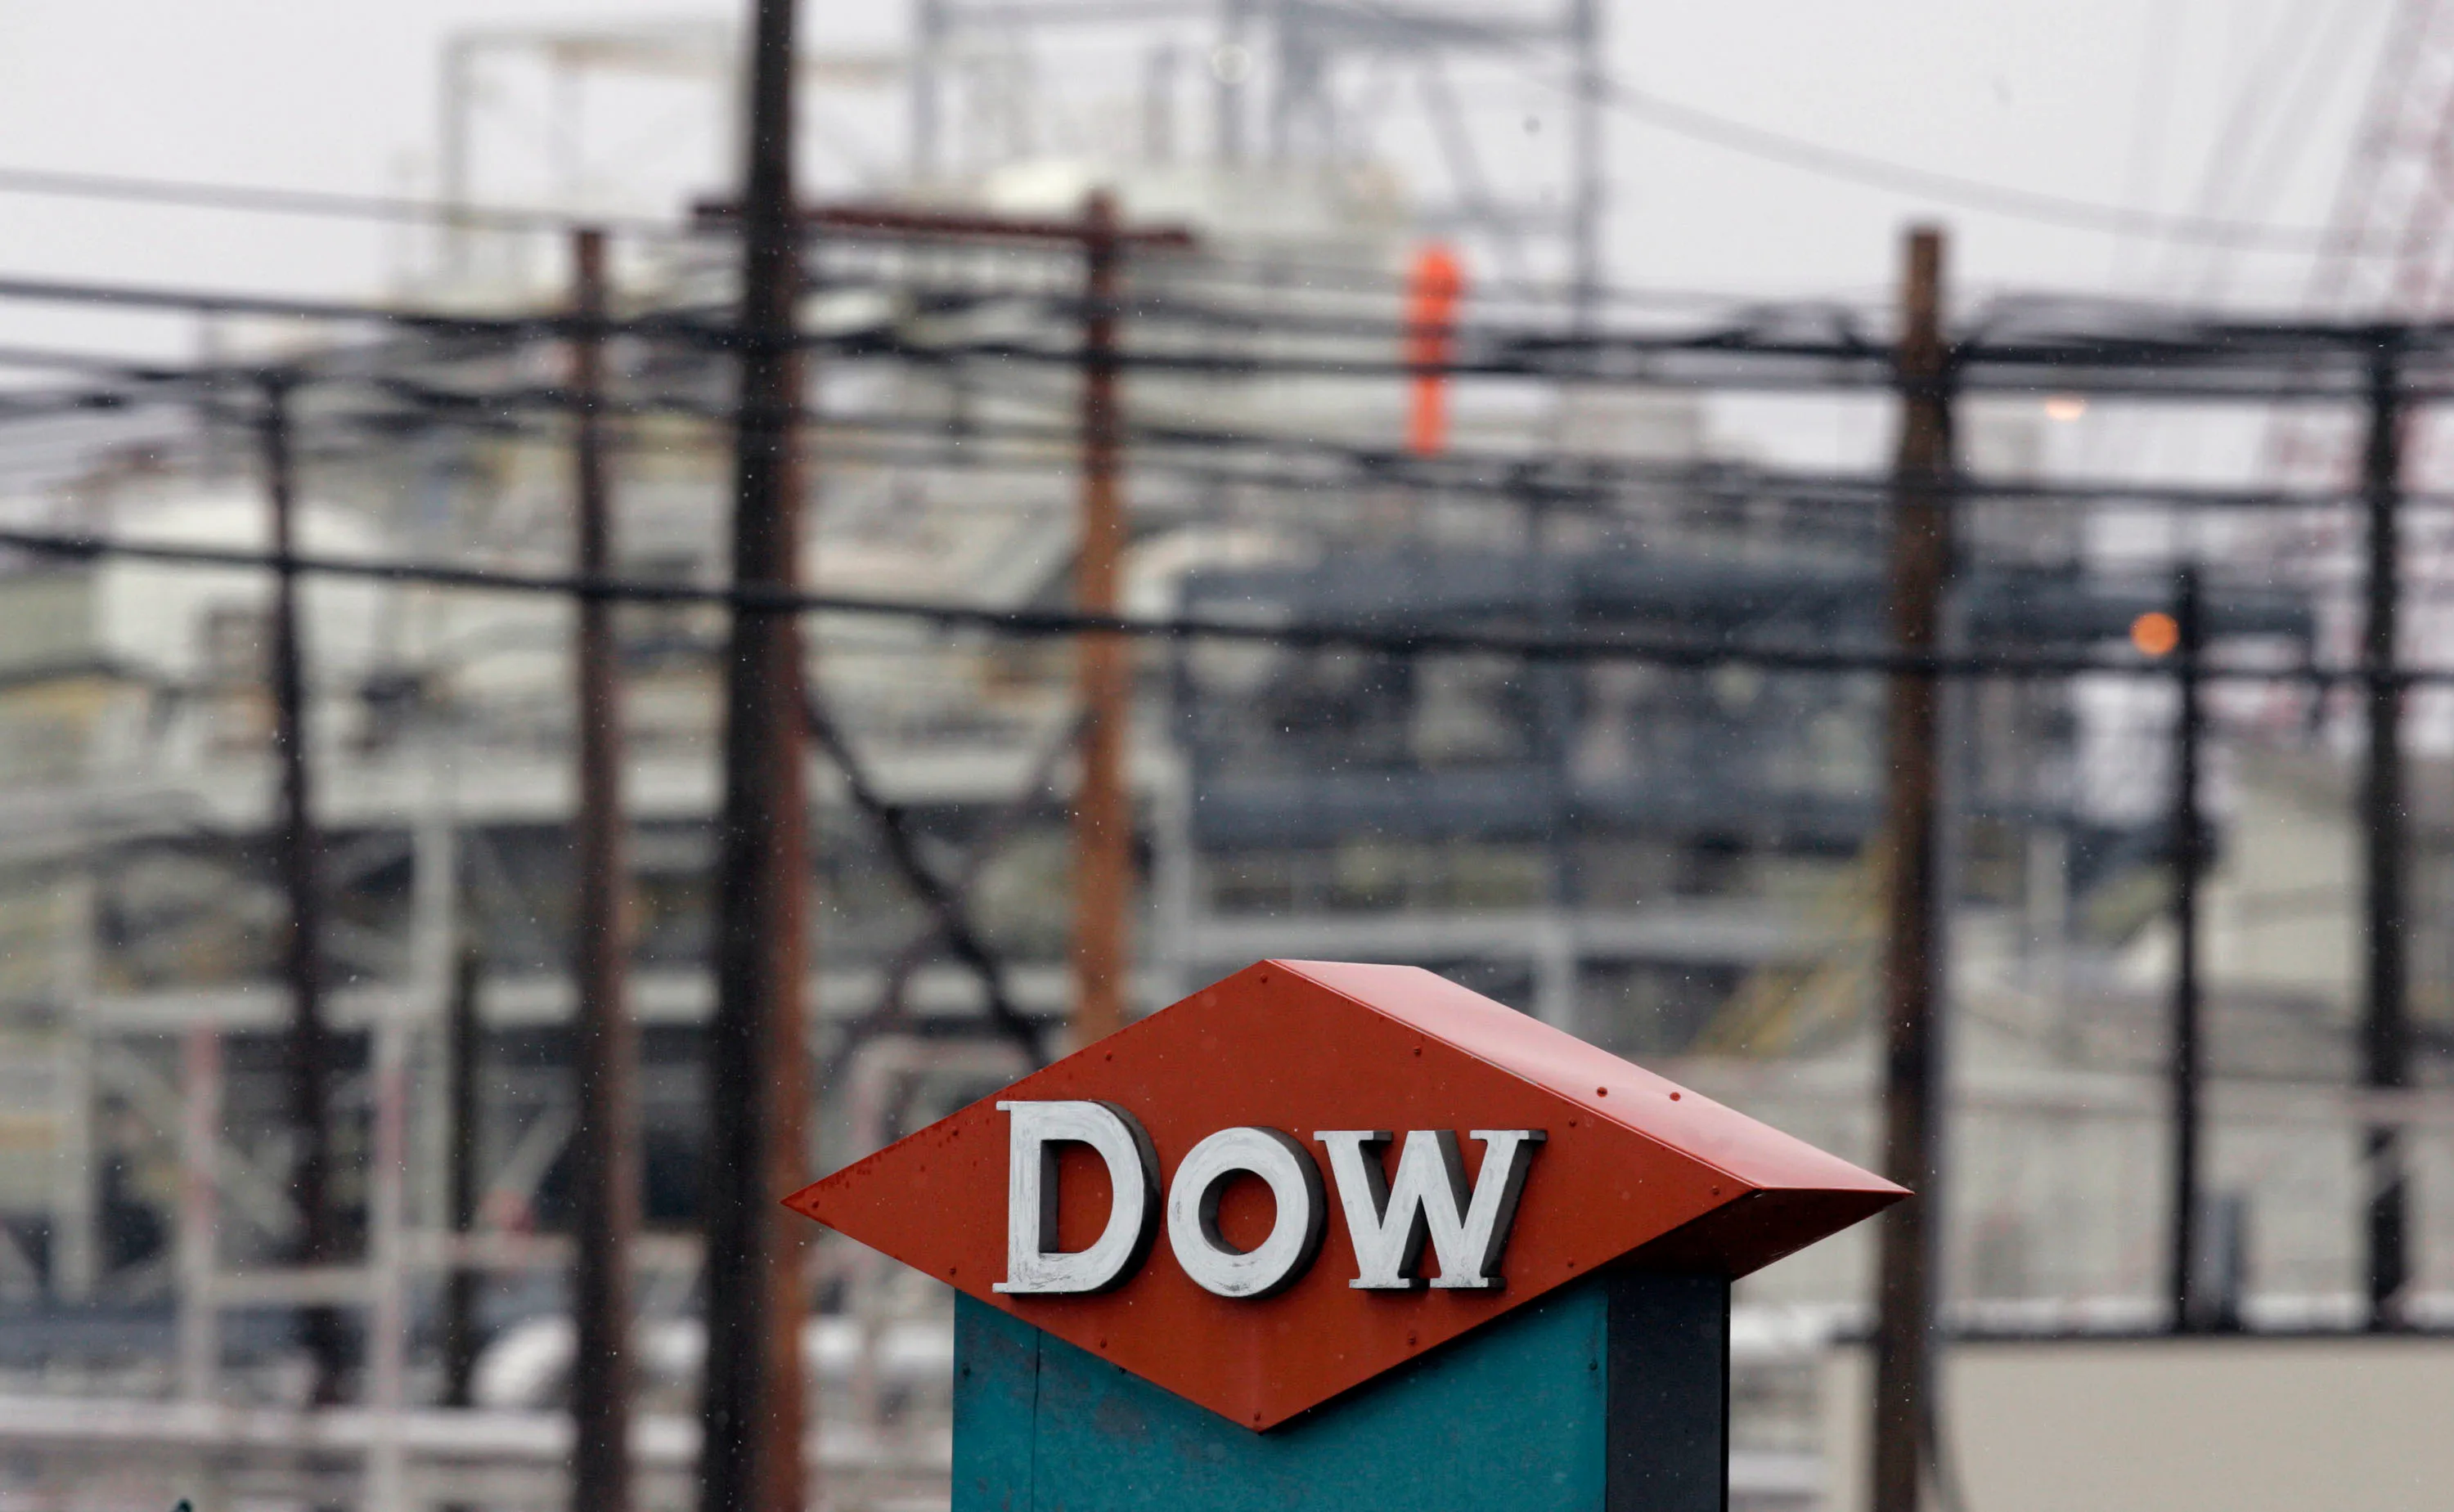 Sales Decline at Dow in Q1, though PU Volumes Rise